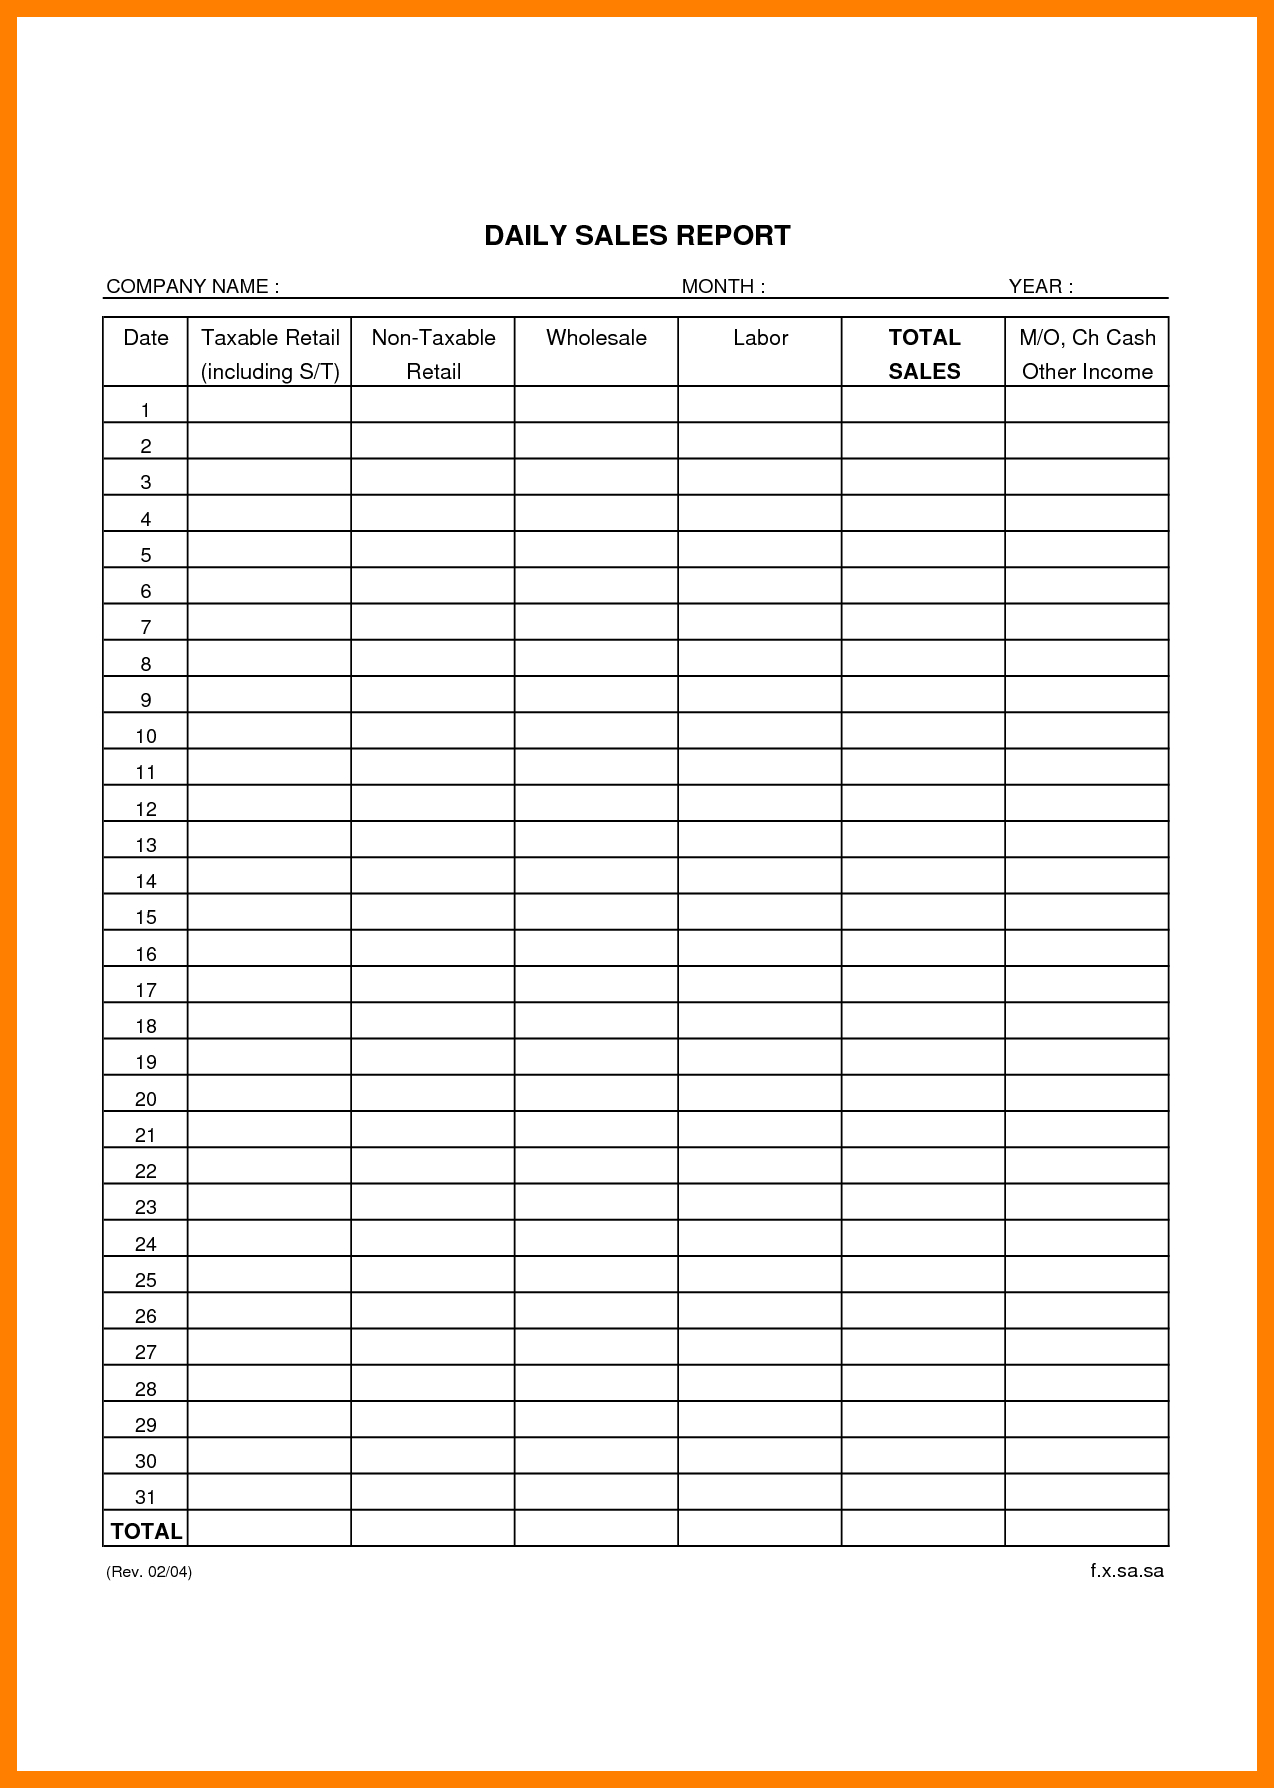 Excel Sales Report Template Free Download - Atlantaauctionco Pertaining To Excel Sales Report Template Free Download